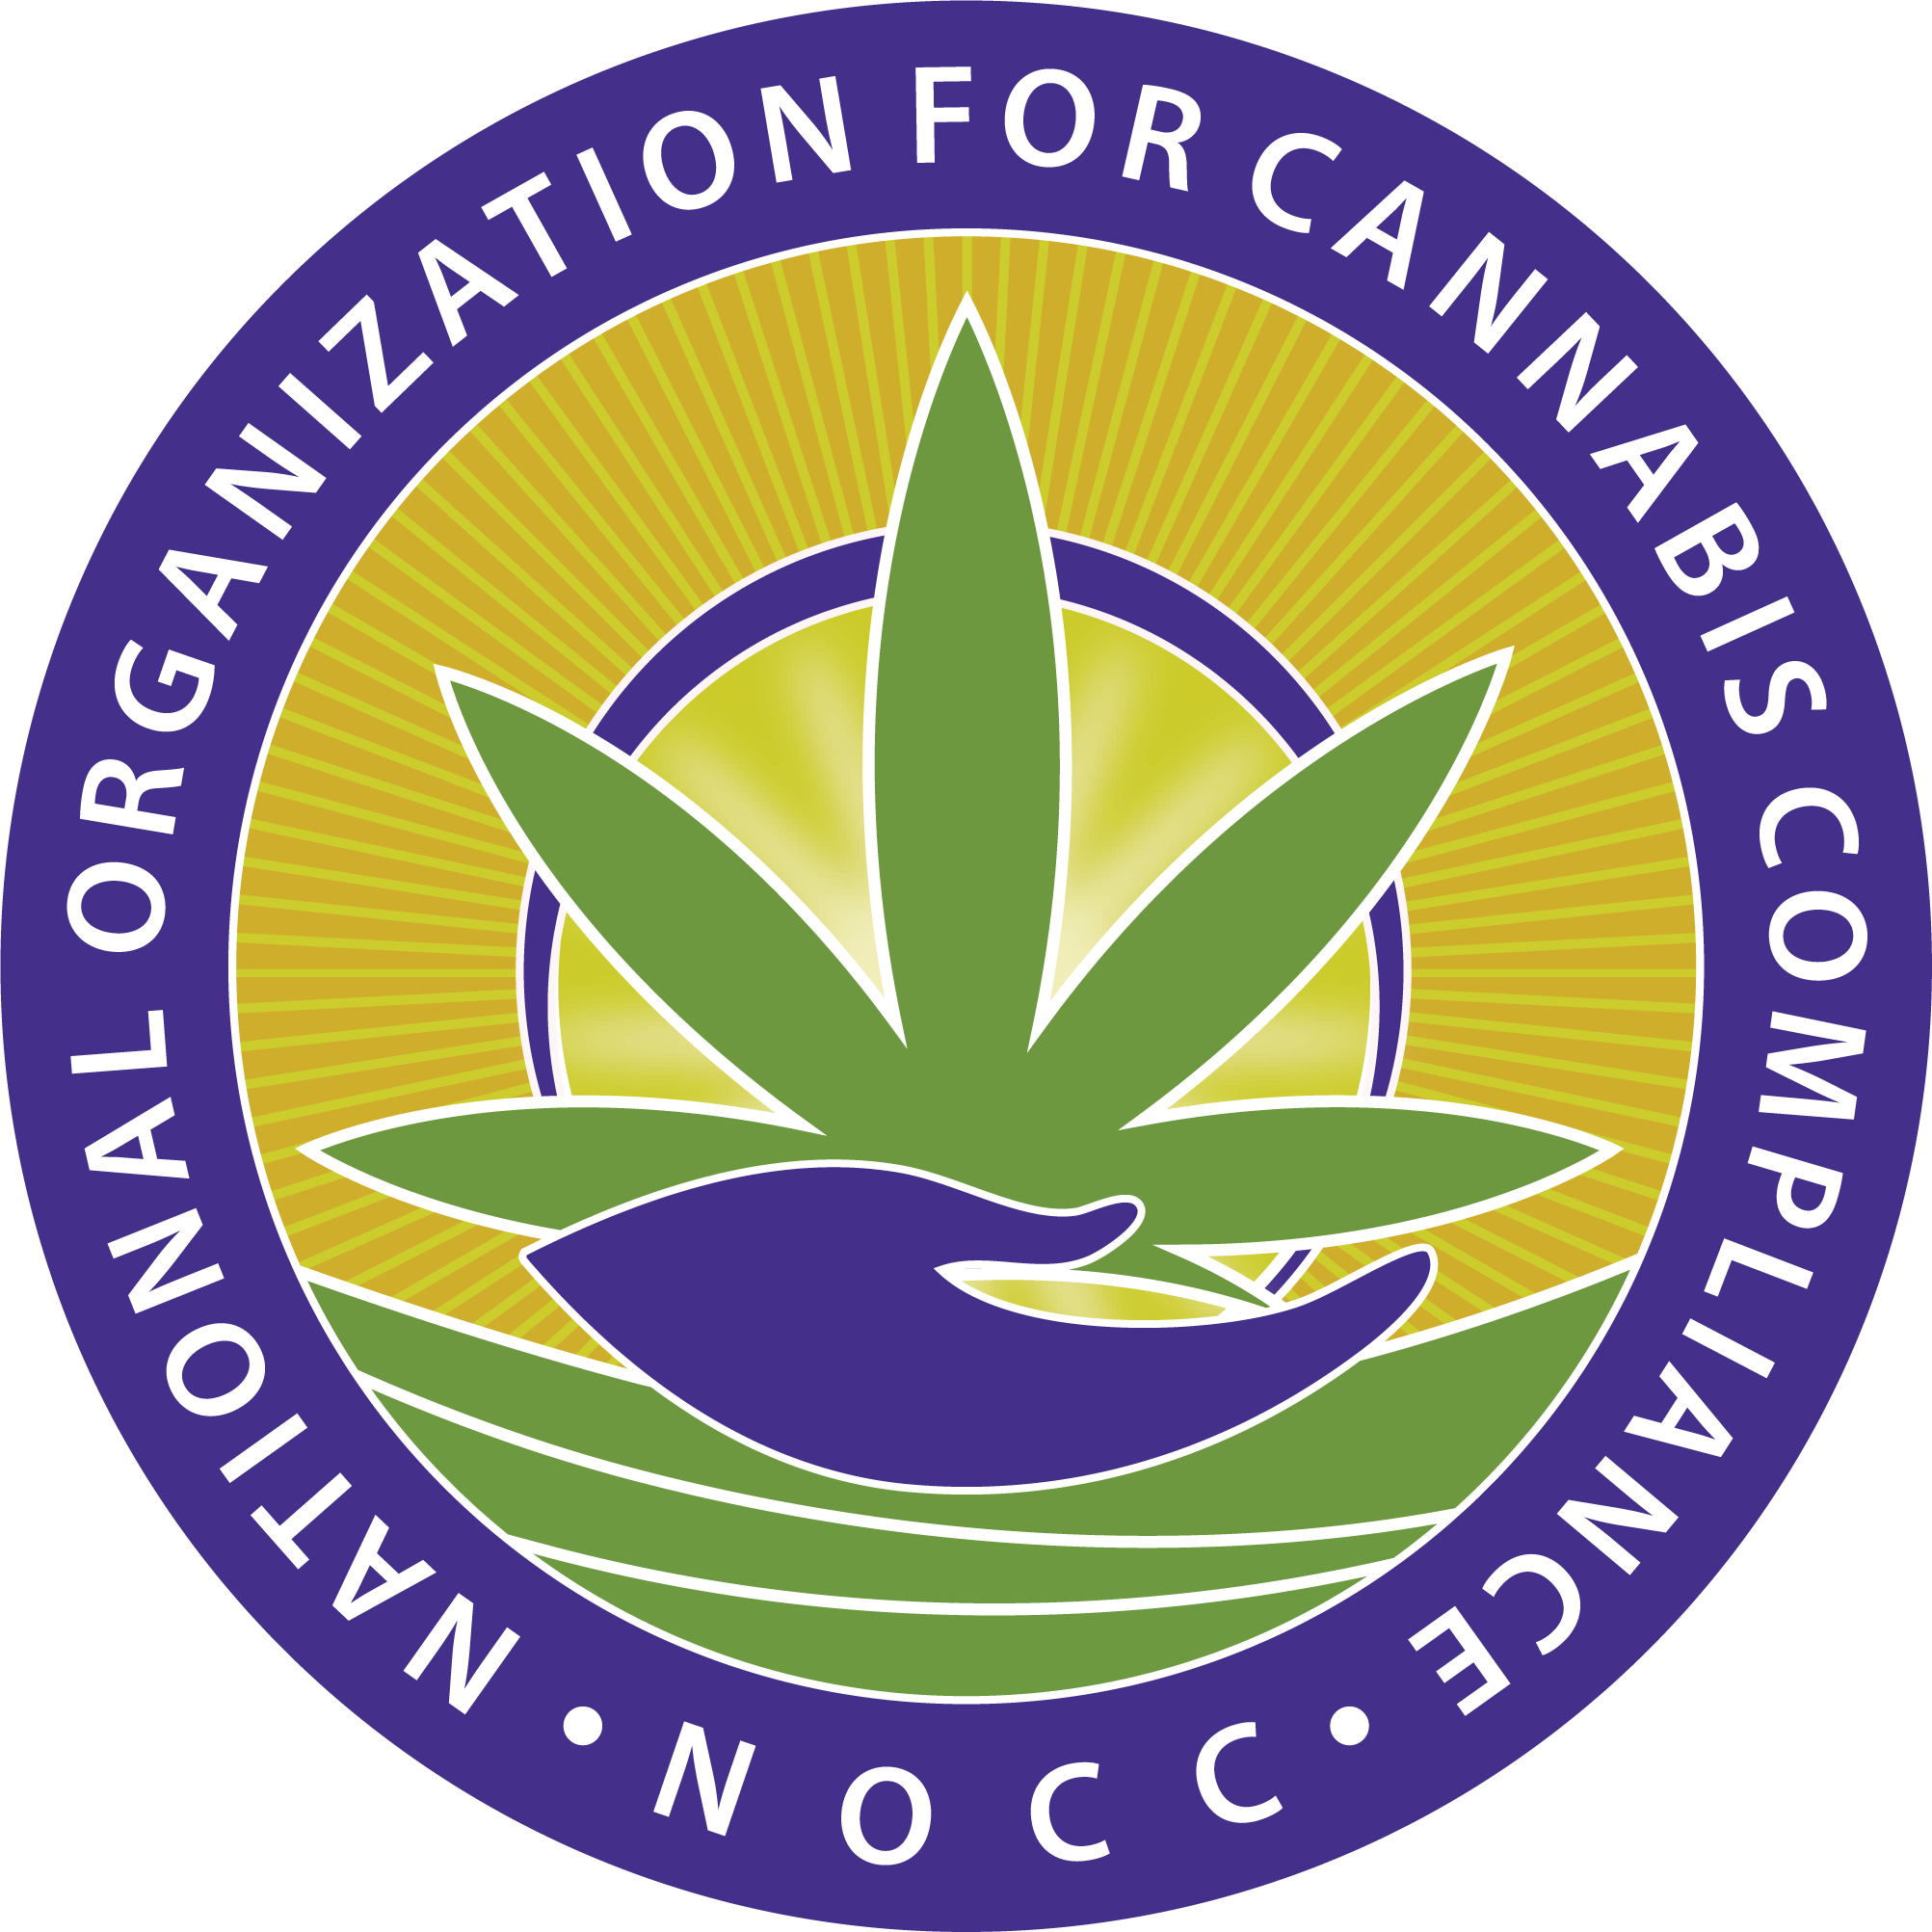 NOCC is a valuable resource for anyone in the legal cannabis industry looking to navigate the complex compliance landscape.